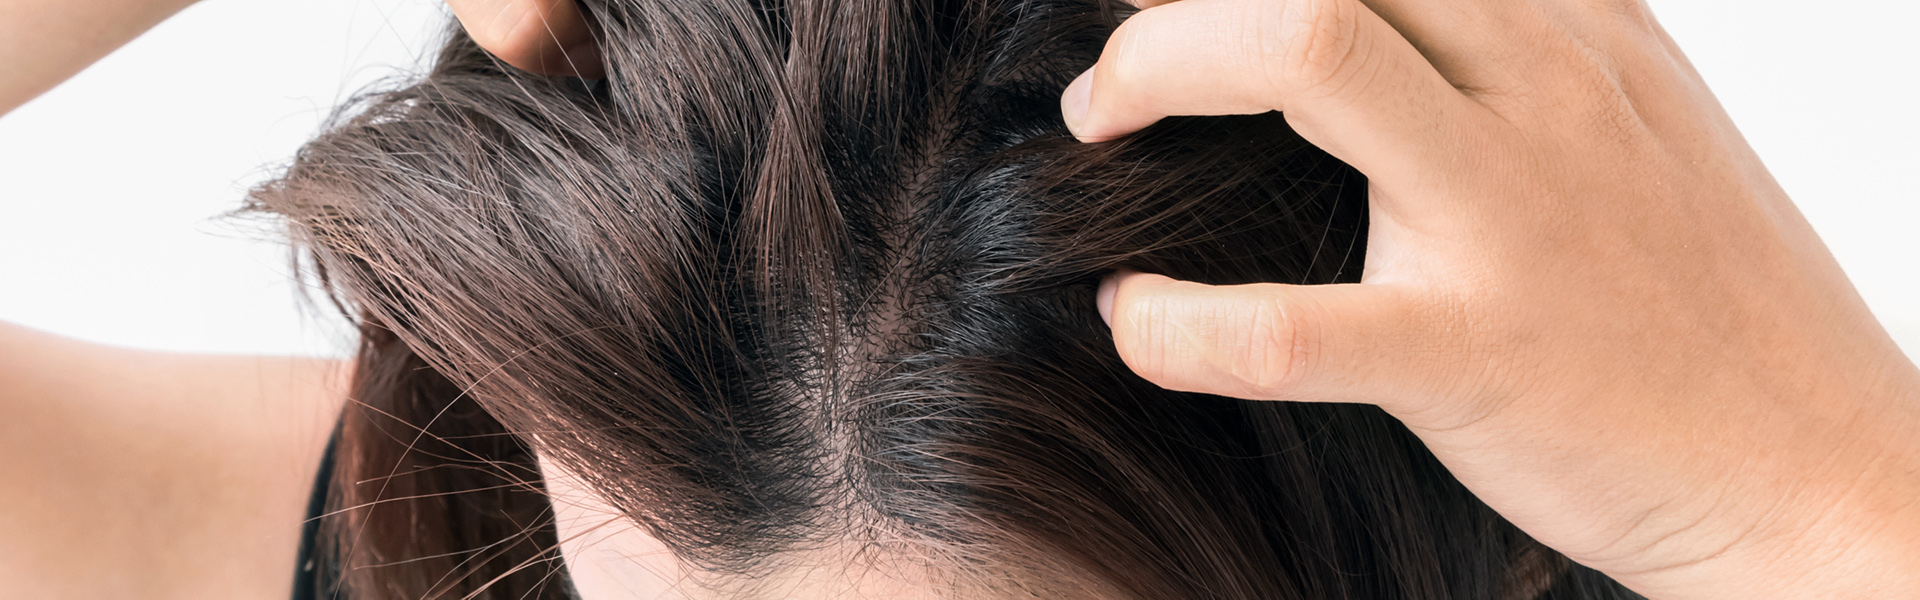 Itchy scalp – Overview about potential causes